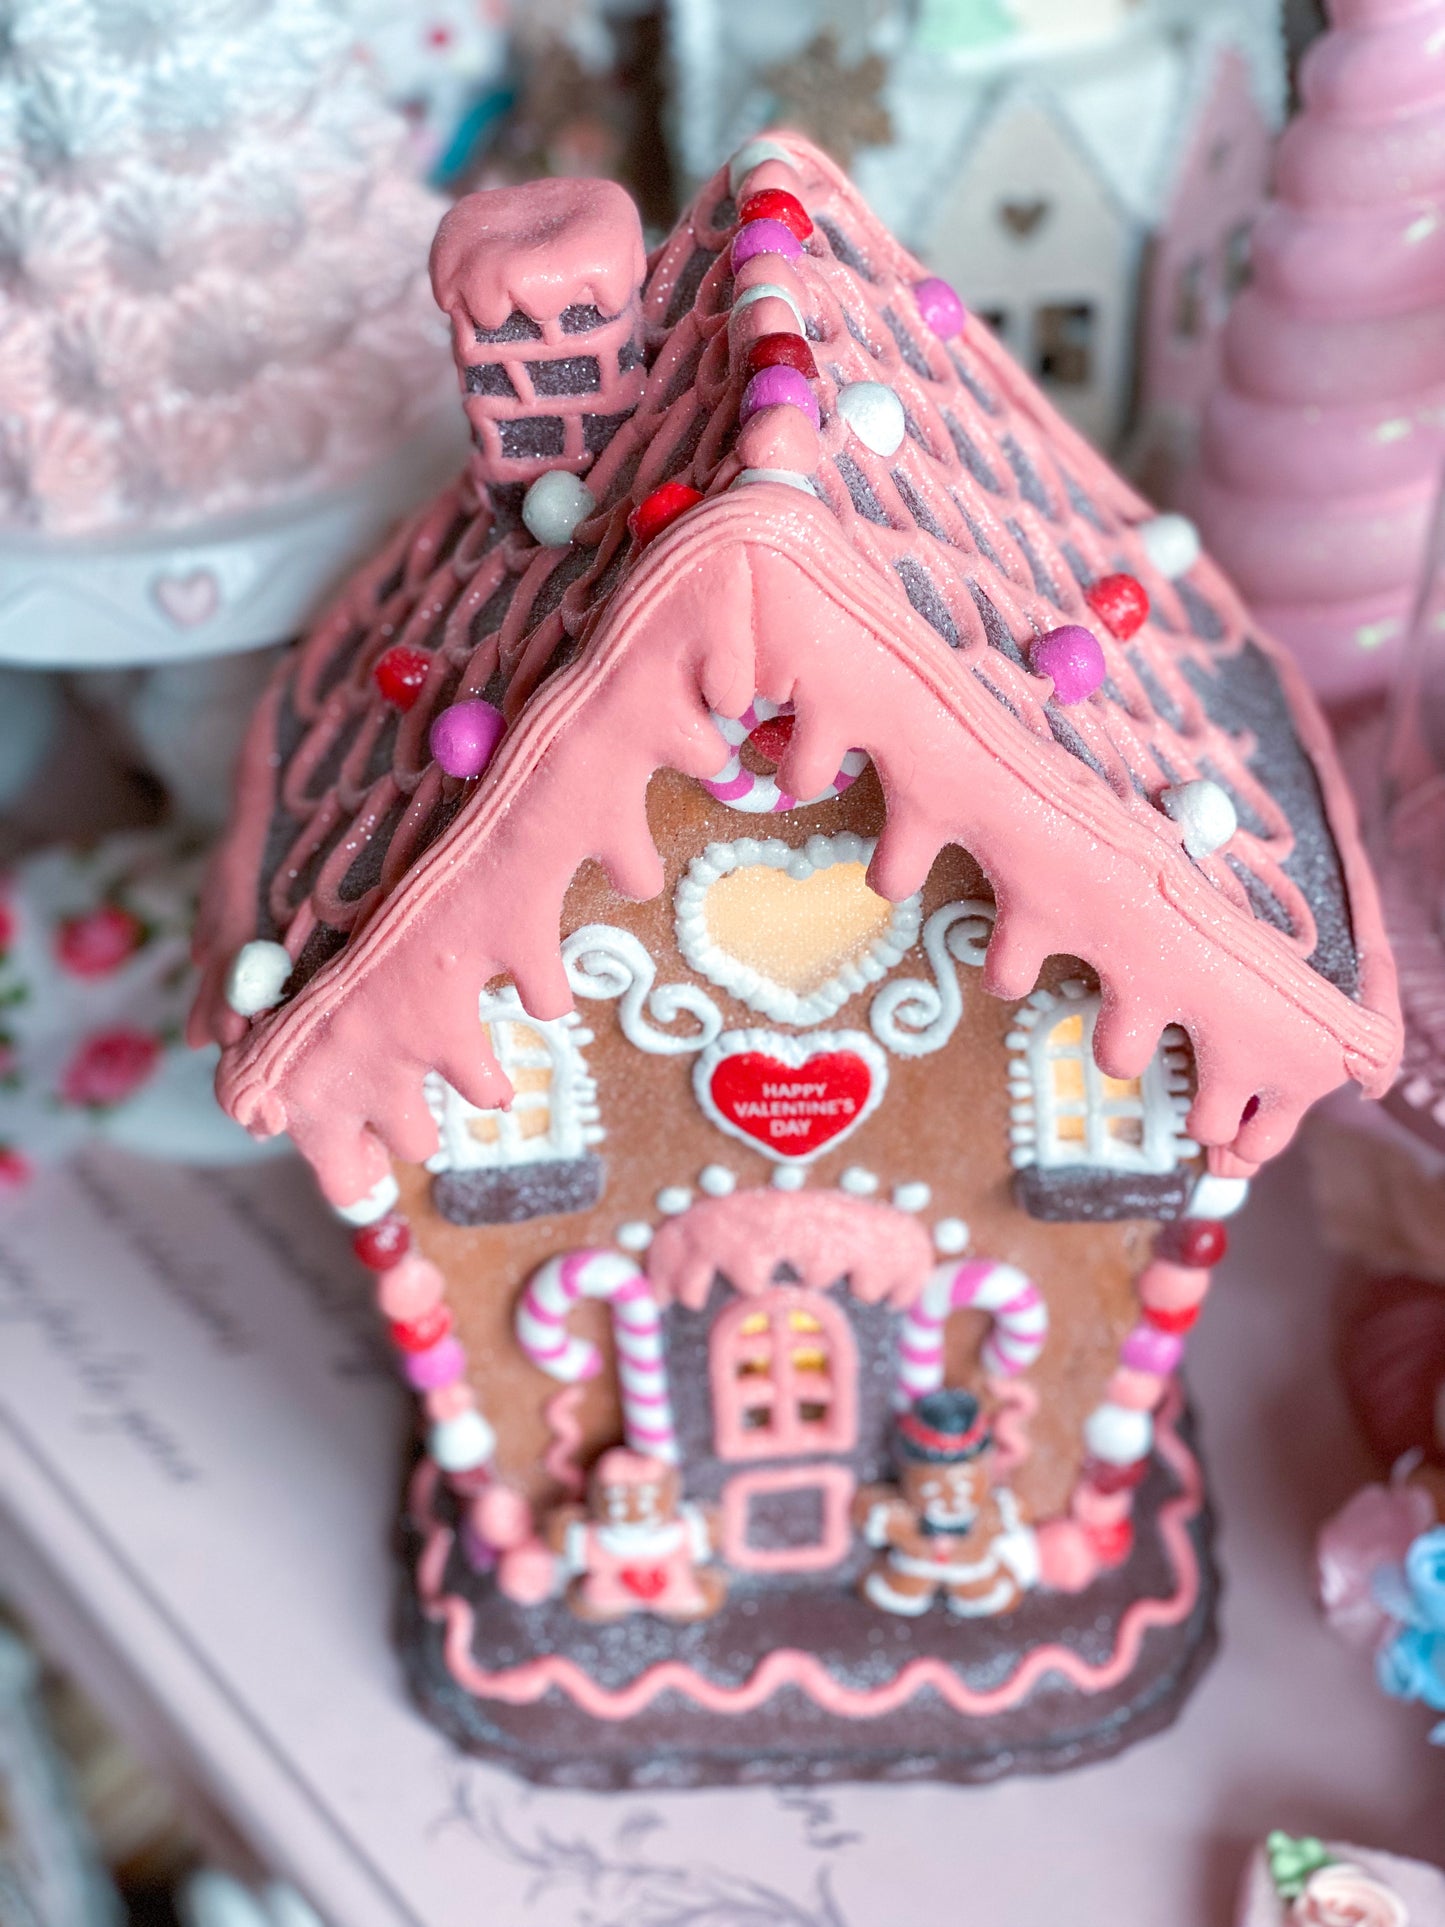 Love Day Gingerbread LED Light Up House